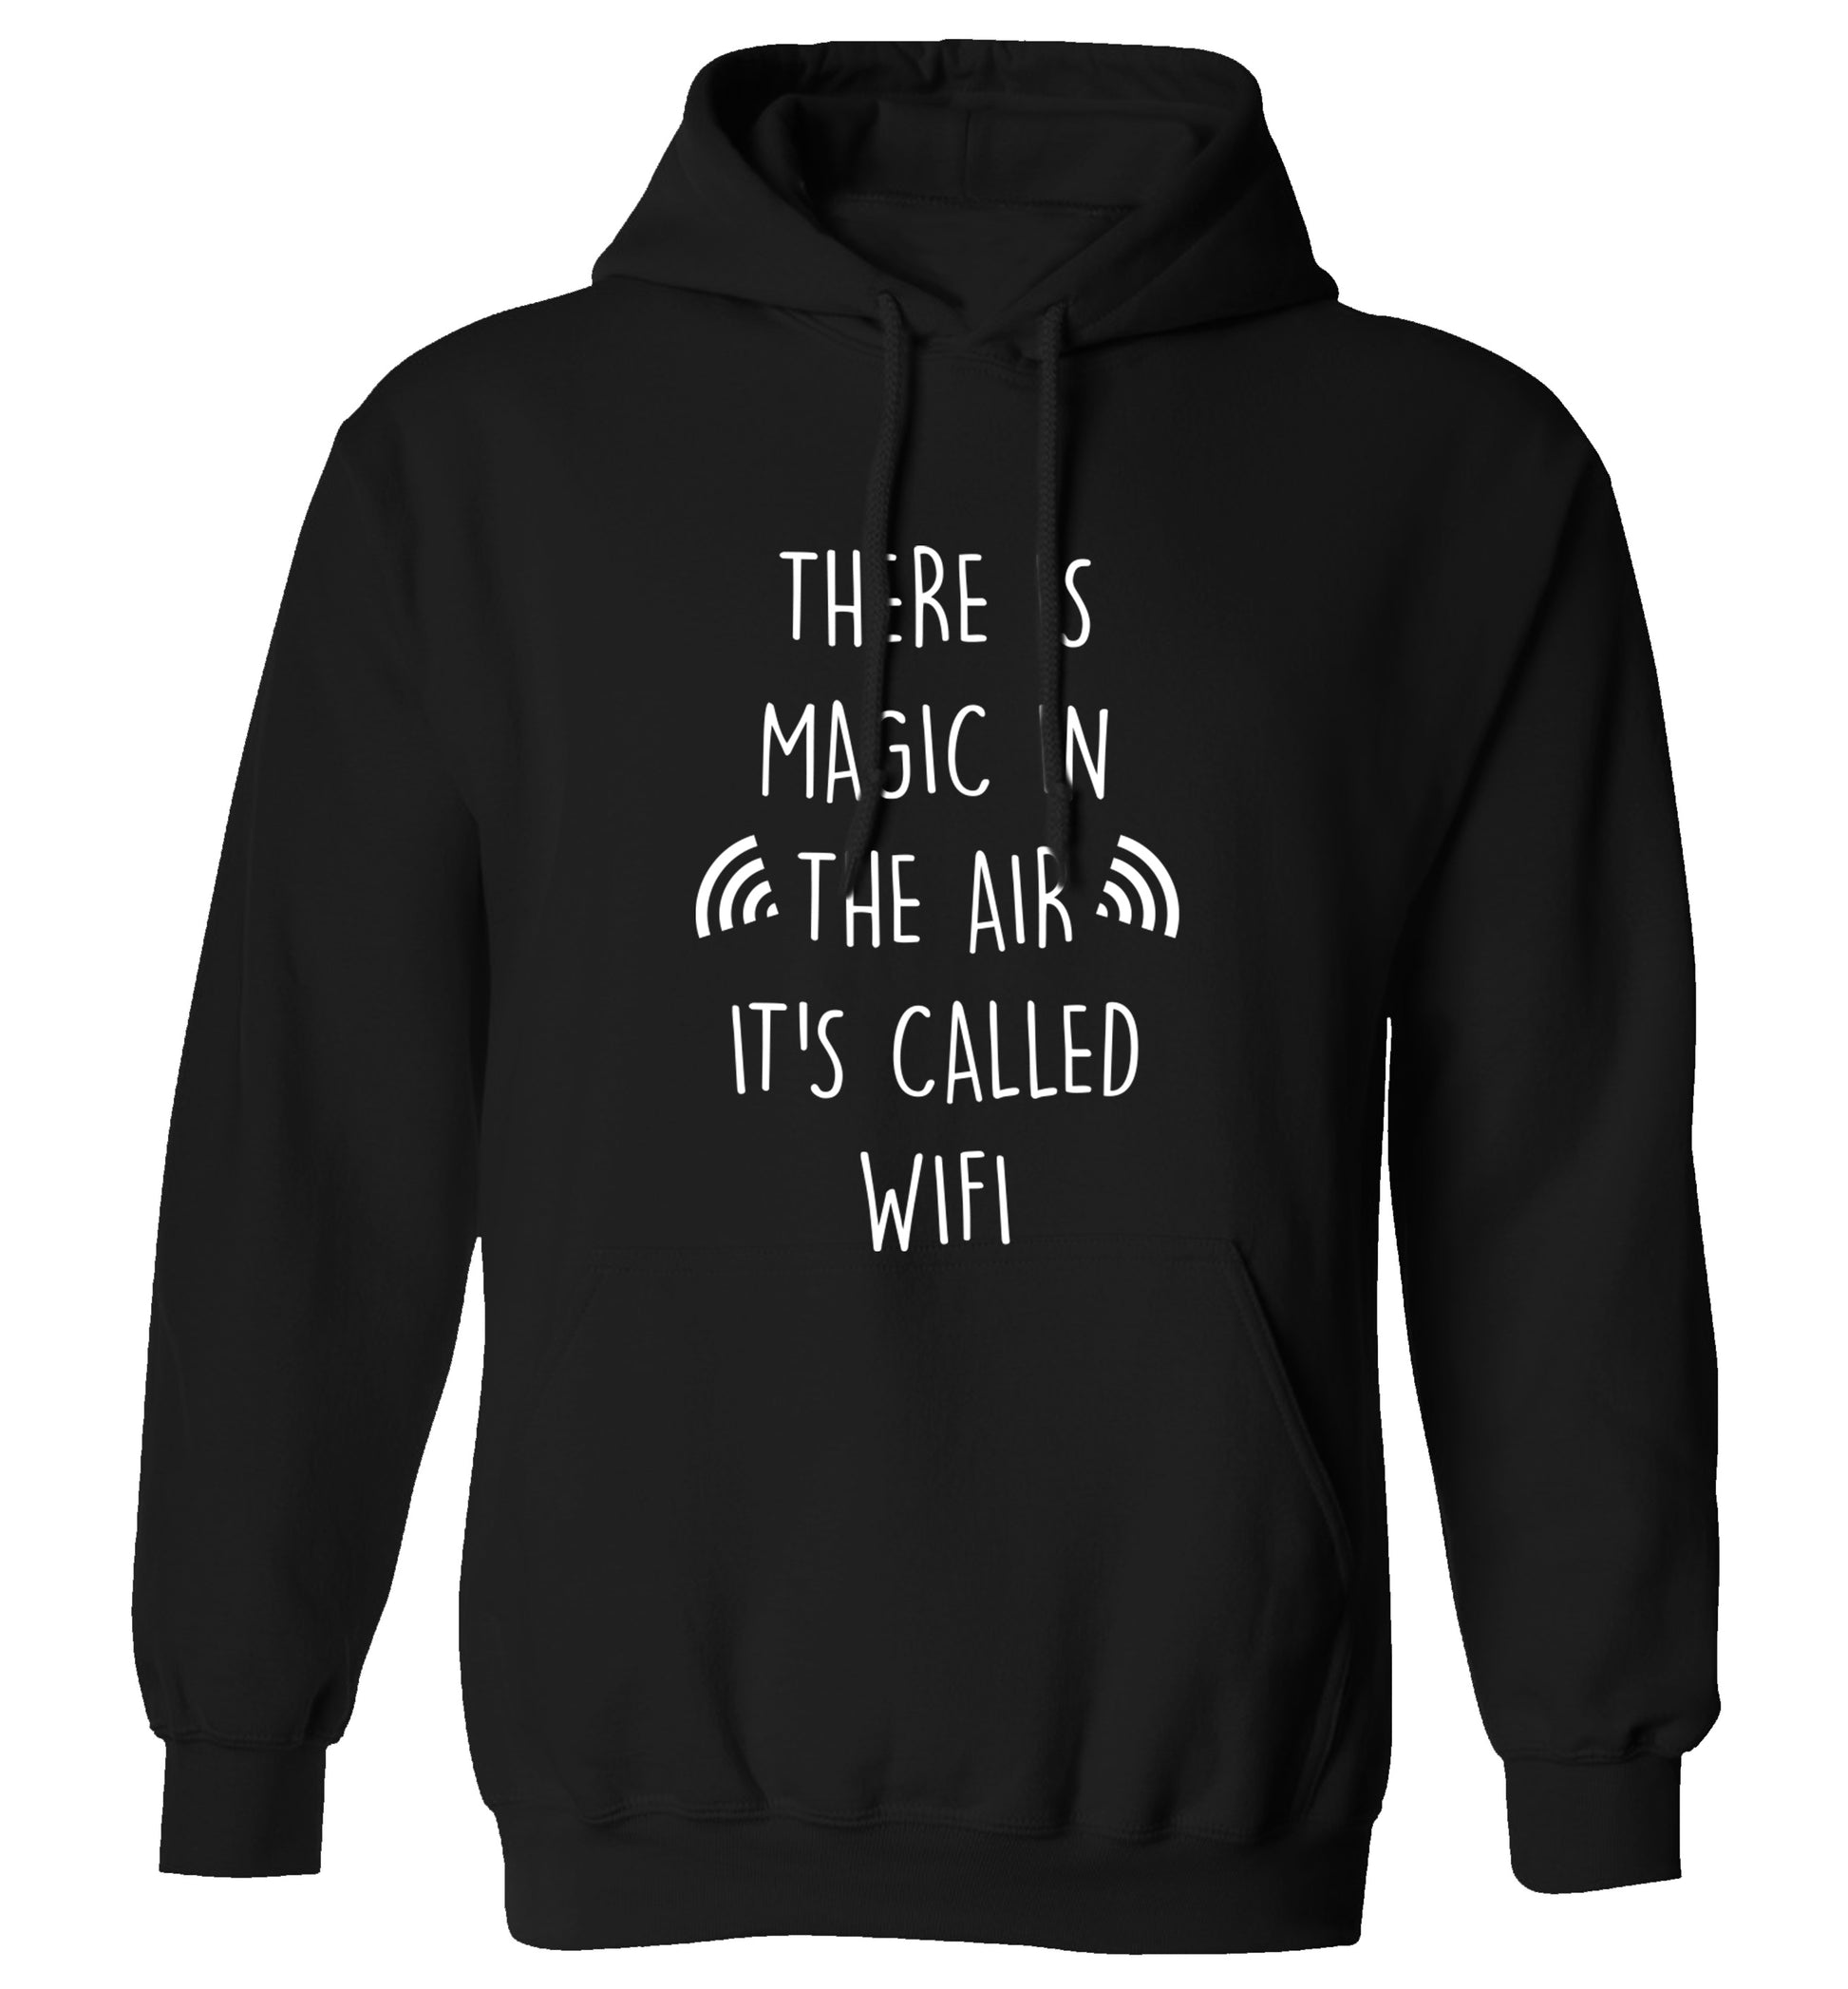 There is magic in the air it's called wifi adults unisex black hoodie 2XL